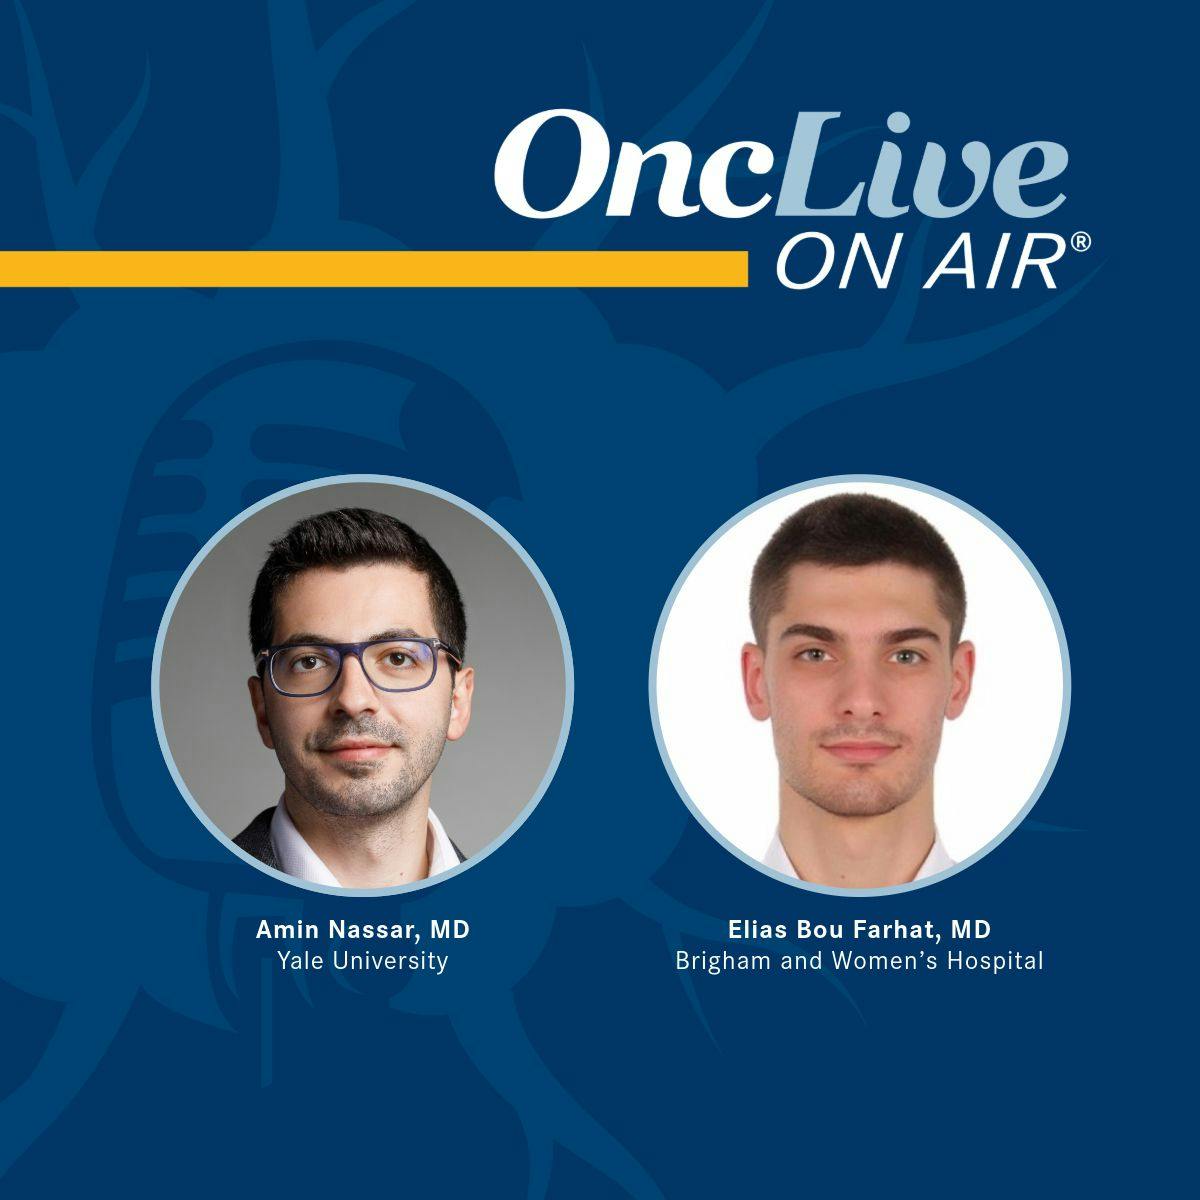 Amin Nassar, MD, hematology/oncology fellow, Yale University; Elias Bou Farhat, MD, postdoctoral research fellow, Department of Medicine, Brigham and Women’s Hospital 